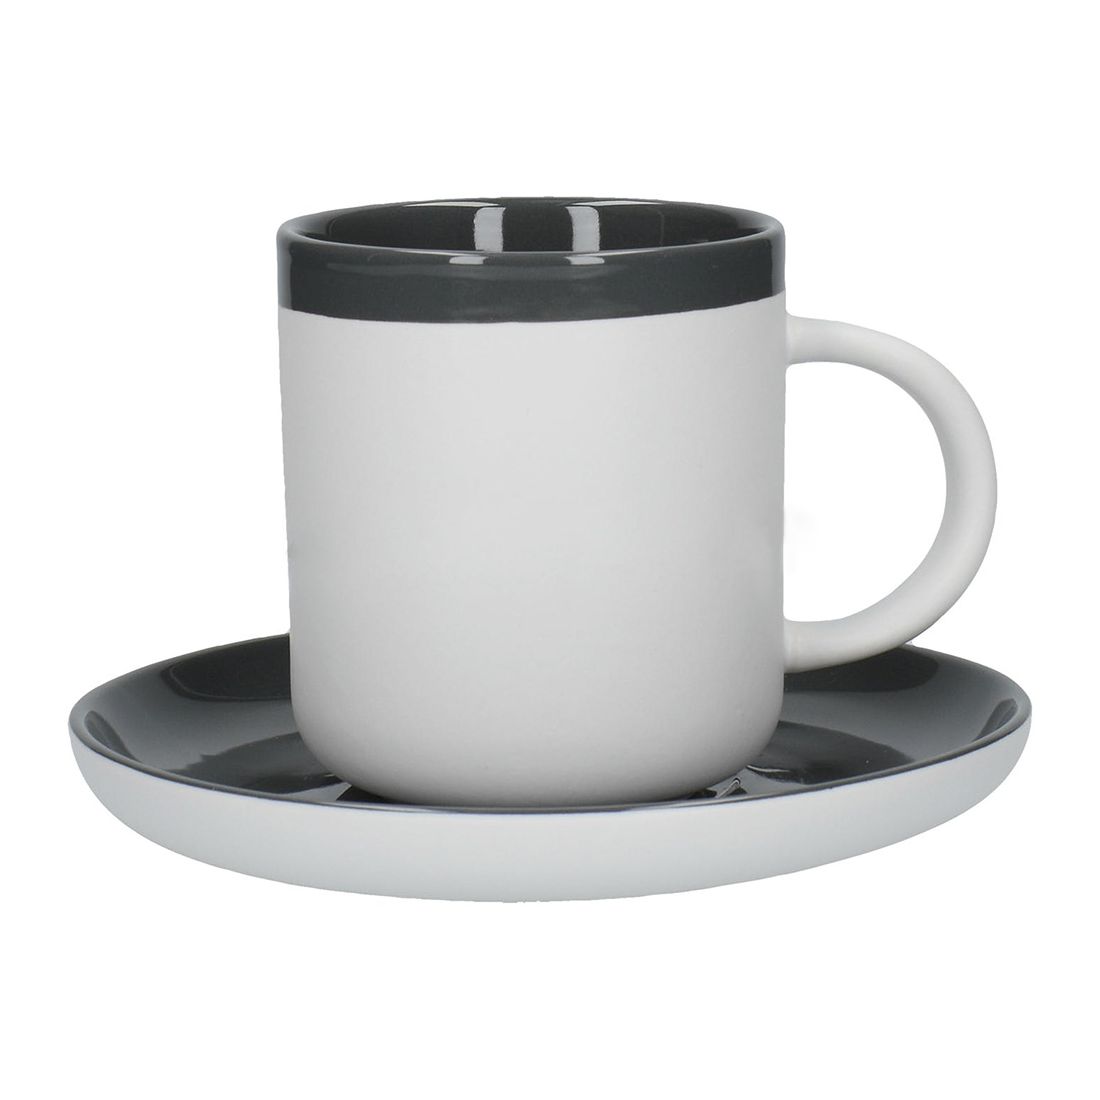 Kitchencraft L.A. Cafetiere Barcelona Cool Grey 100ml Espresso Cup & Saucer